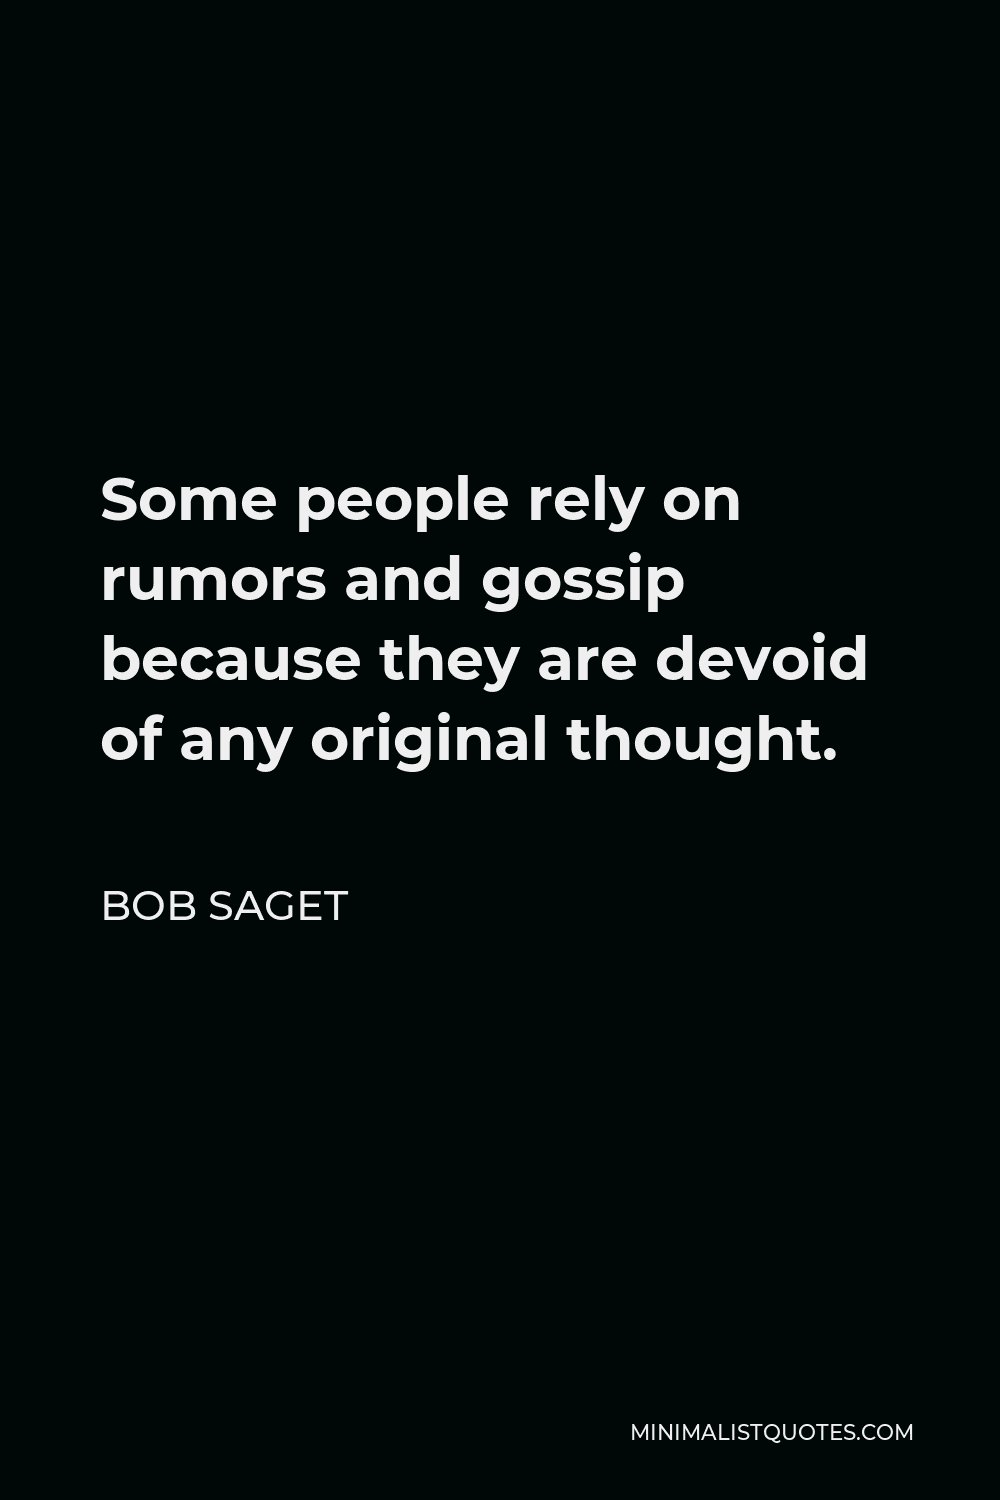 Bob Saget Quote - Some people rely on rumors and gossip because they are devoid of any original thought.